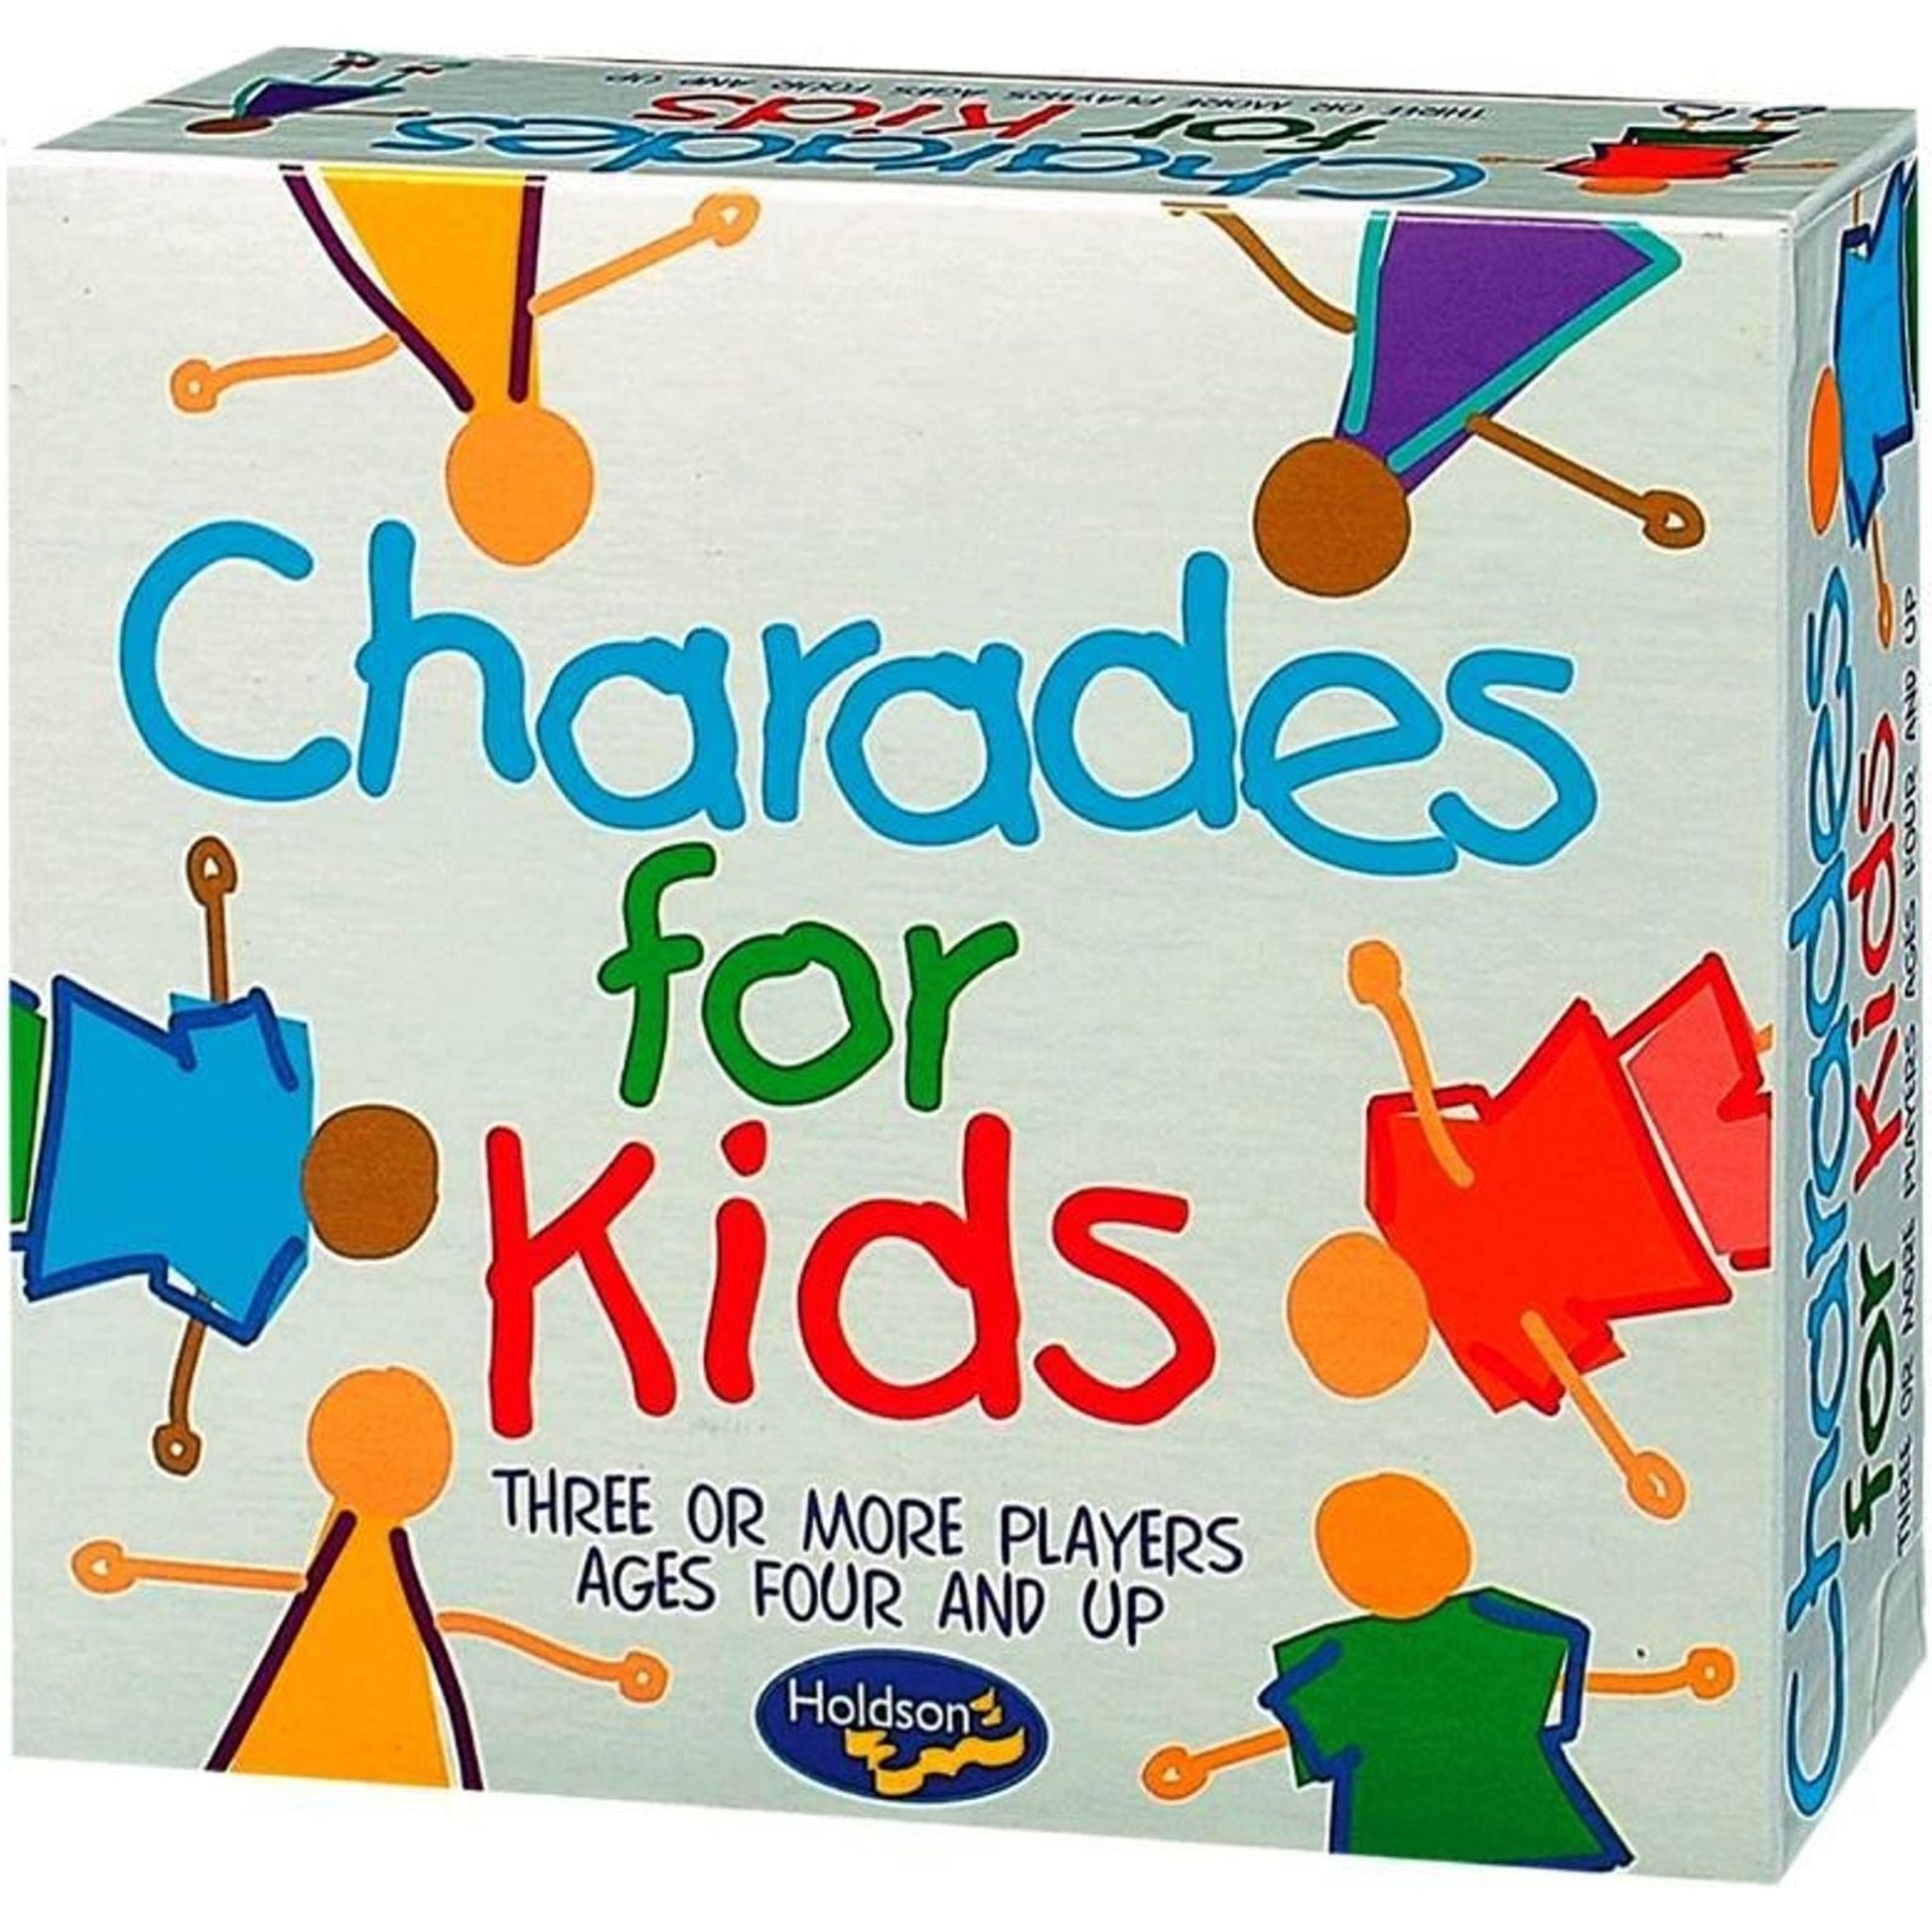 Charades for Kids - Toybox Tales